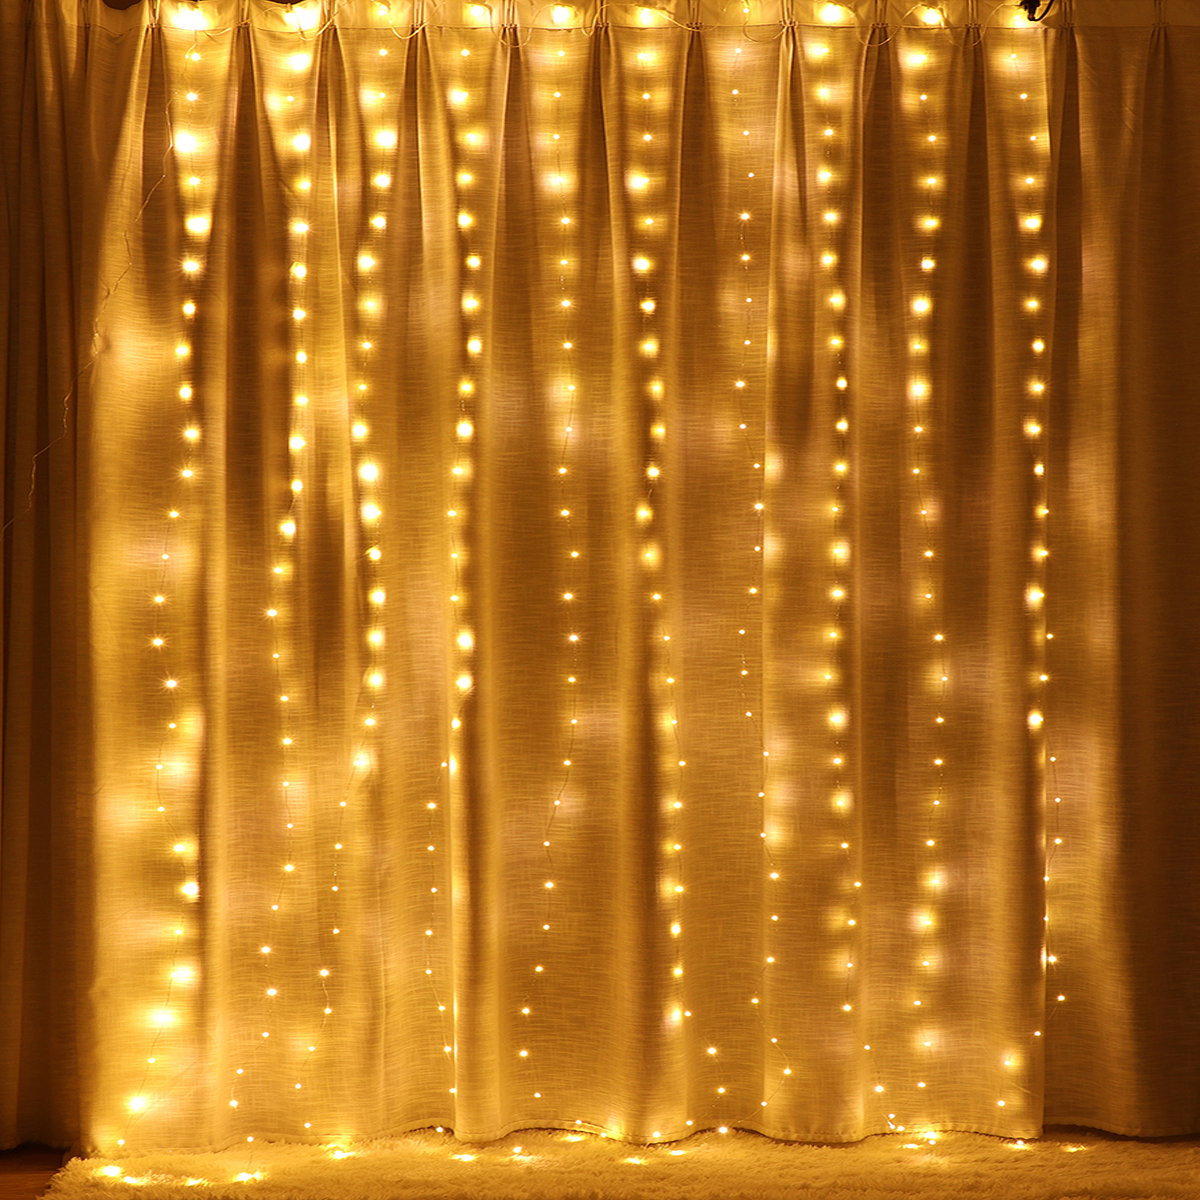 3M2M-USB-200LED-Curtain-Window-Fairy-String-Light-Twinkle-Christmas-Party-Wedding-Holiday-Outdoor-La-1742672-8